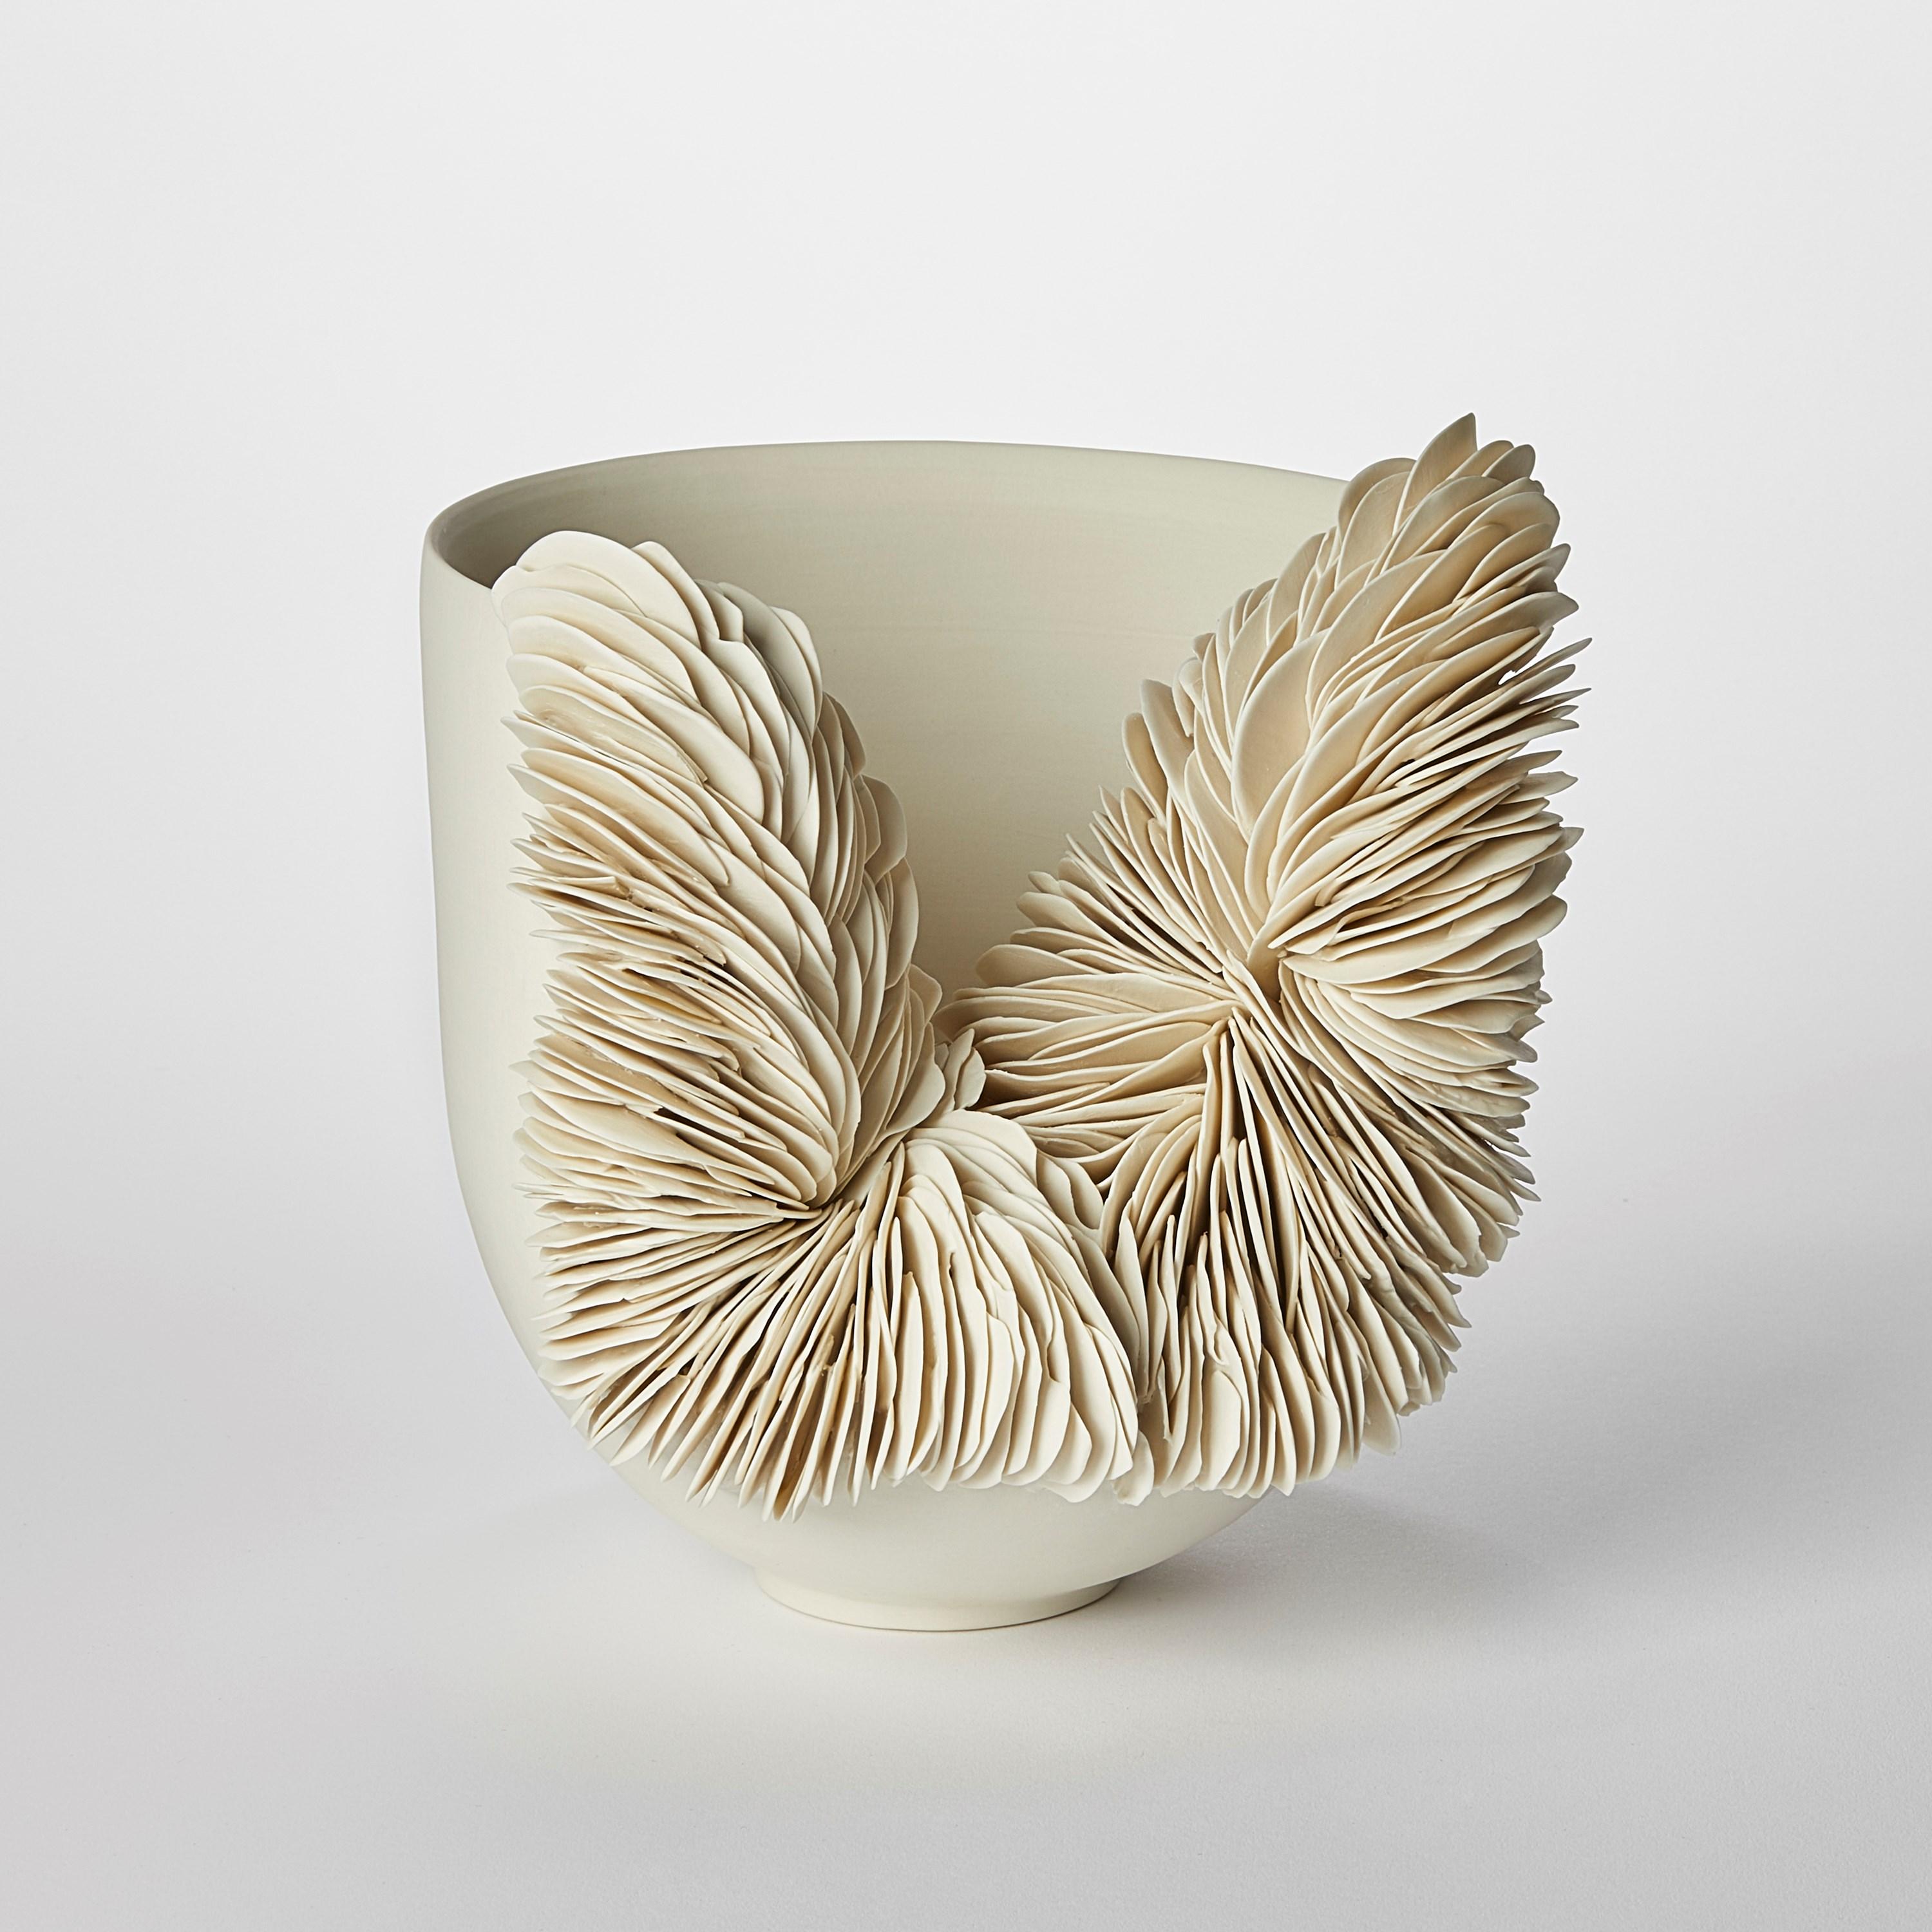 'White Collapsed Bowl' is a unique porcelain sculpture by the British artist, Olivia Walker.

Walker works in porcelain to create pieces that explore ideas of growth and decay through the construction and layering of complex surfaces.

All of her